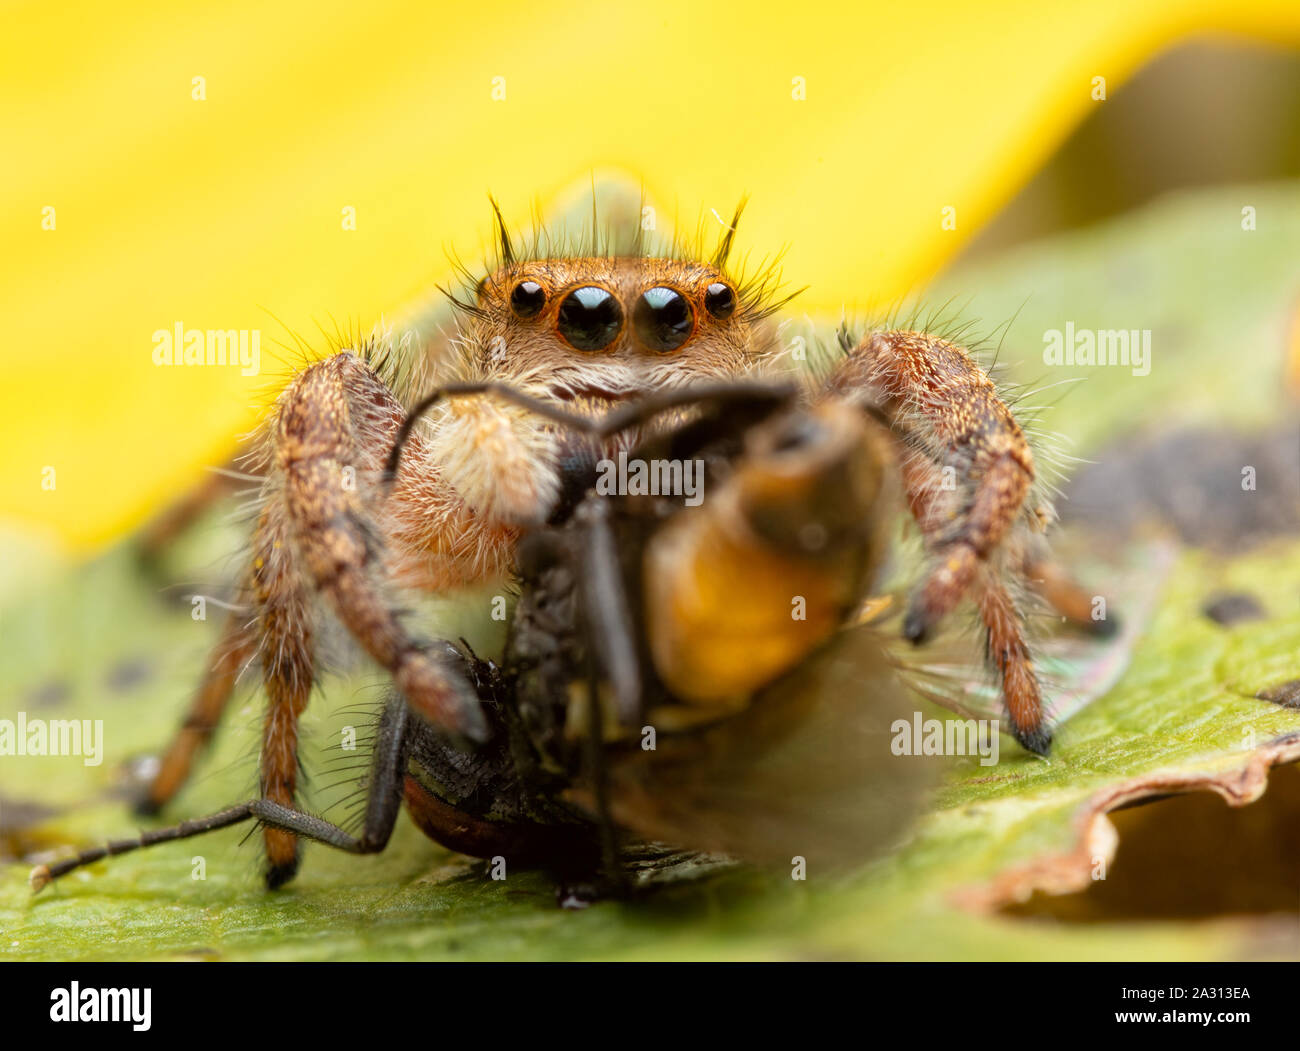 Beautiful female Phidippus princeps jumping spider eating a fly while sitting on a Sunflower Stock Photo